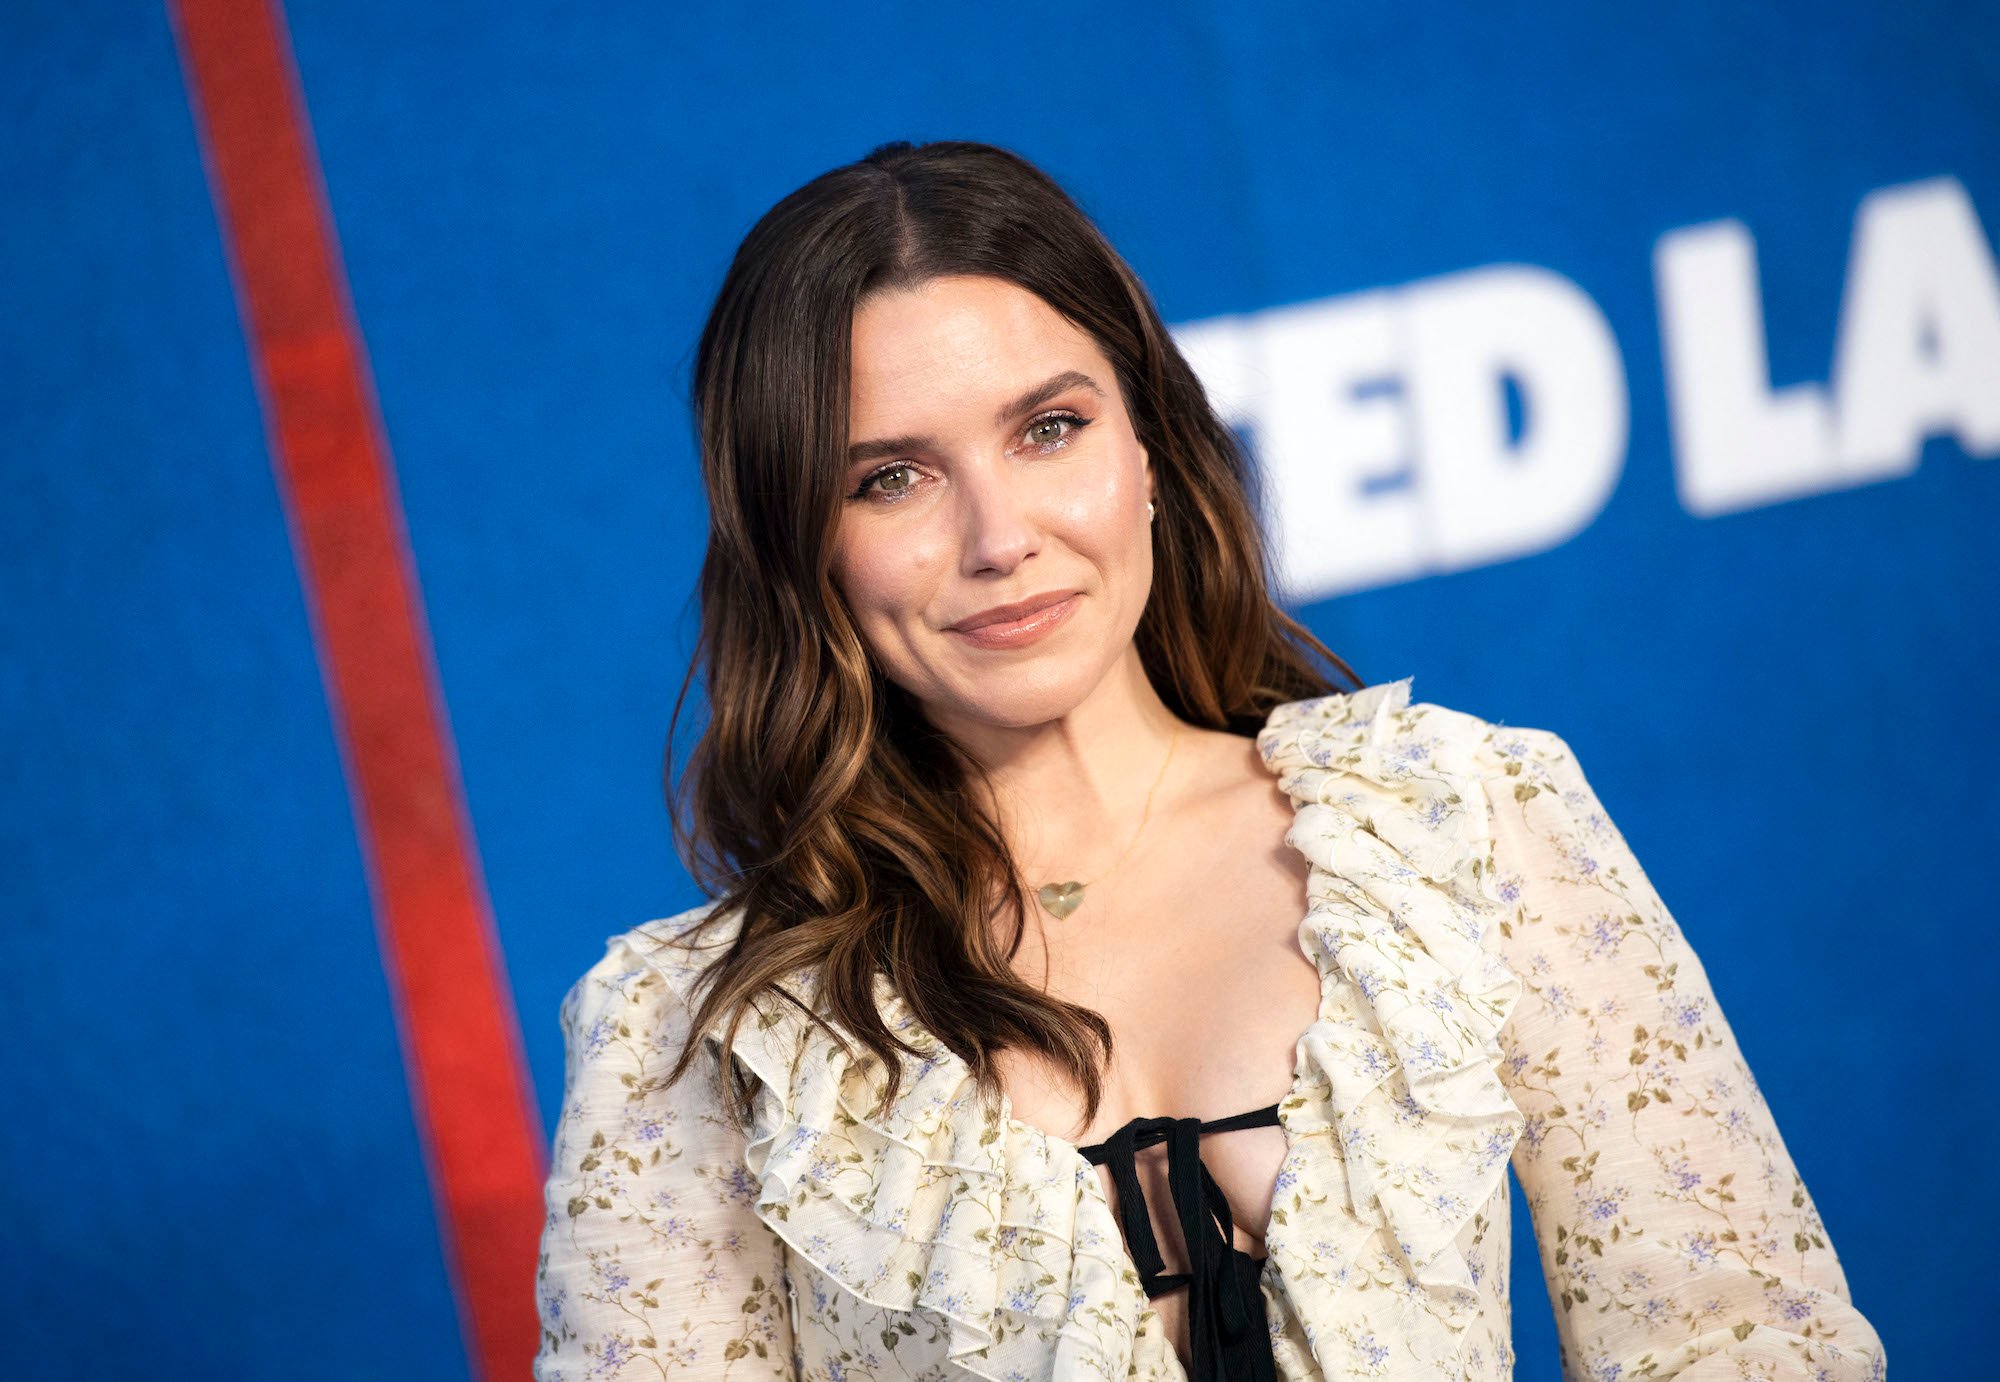 Sophia Bush smiling in front of a blue background